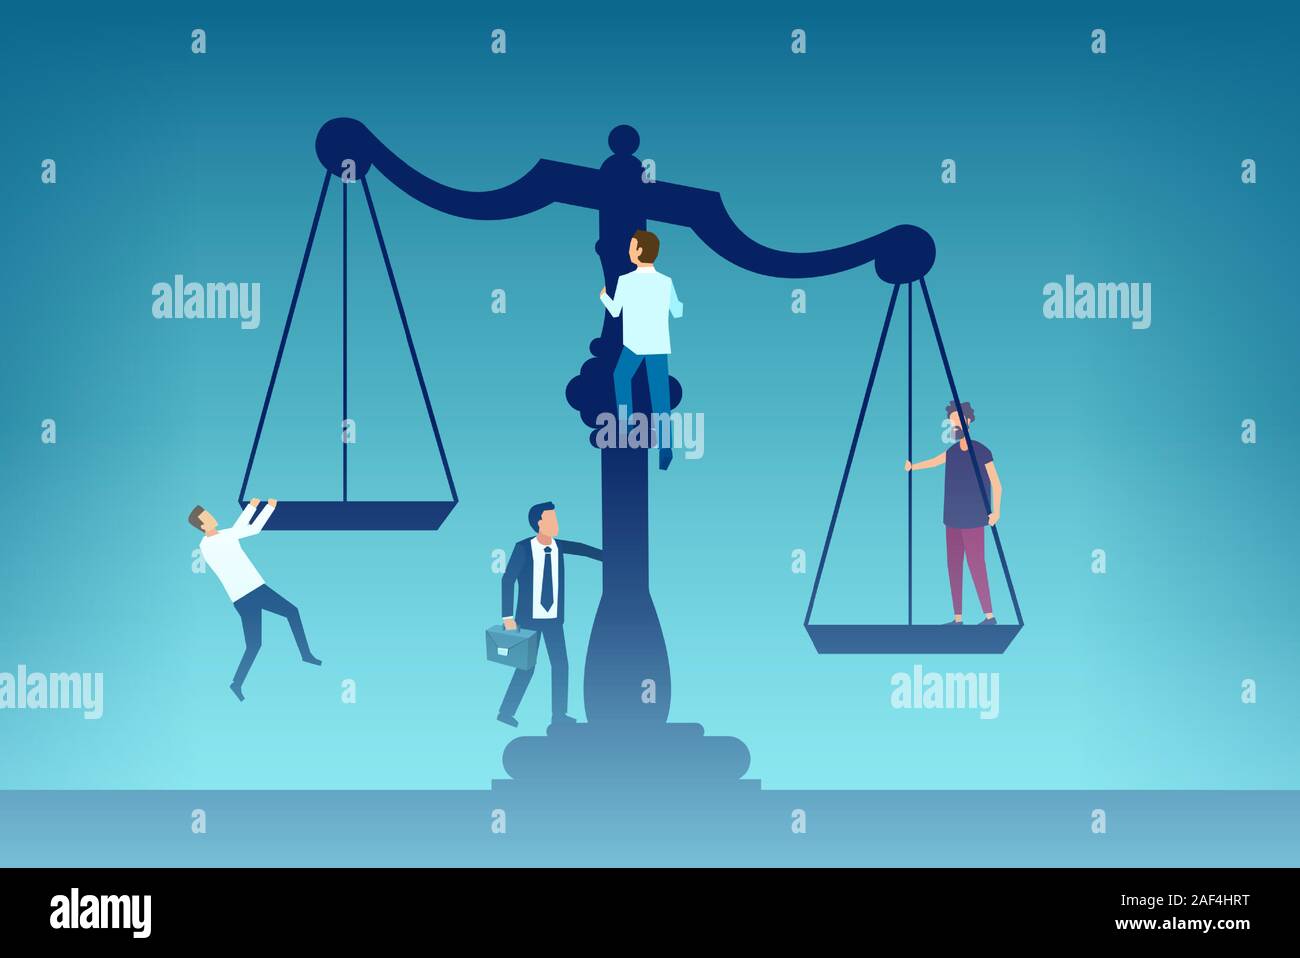 Law influence concept. Vector of a group of competing people climbing up the justice scales Stock Vector